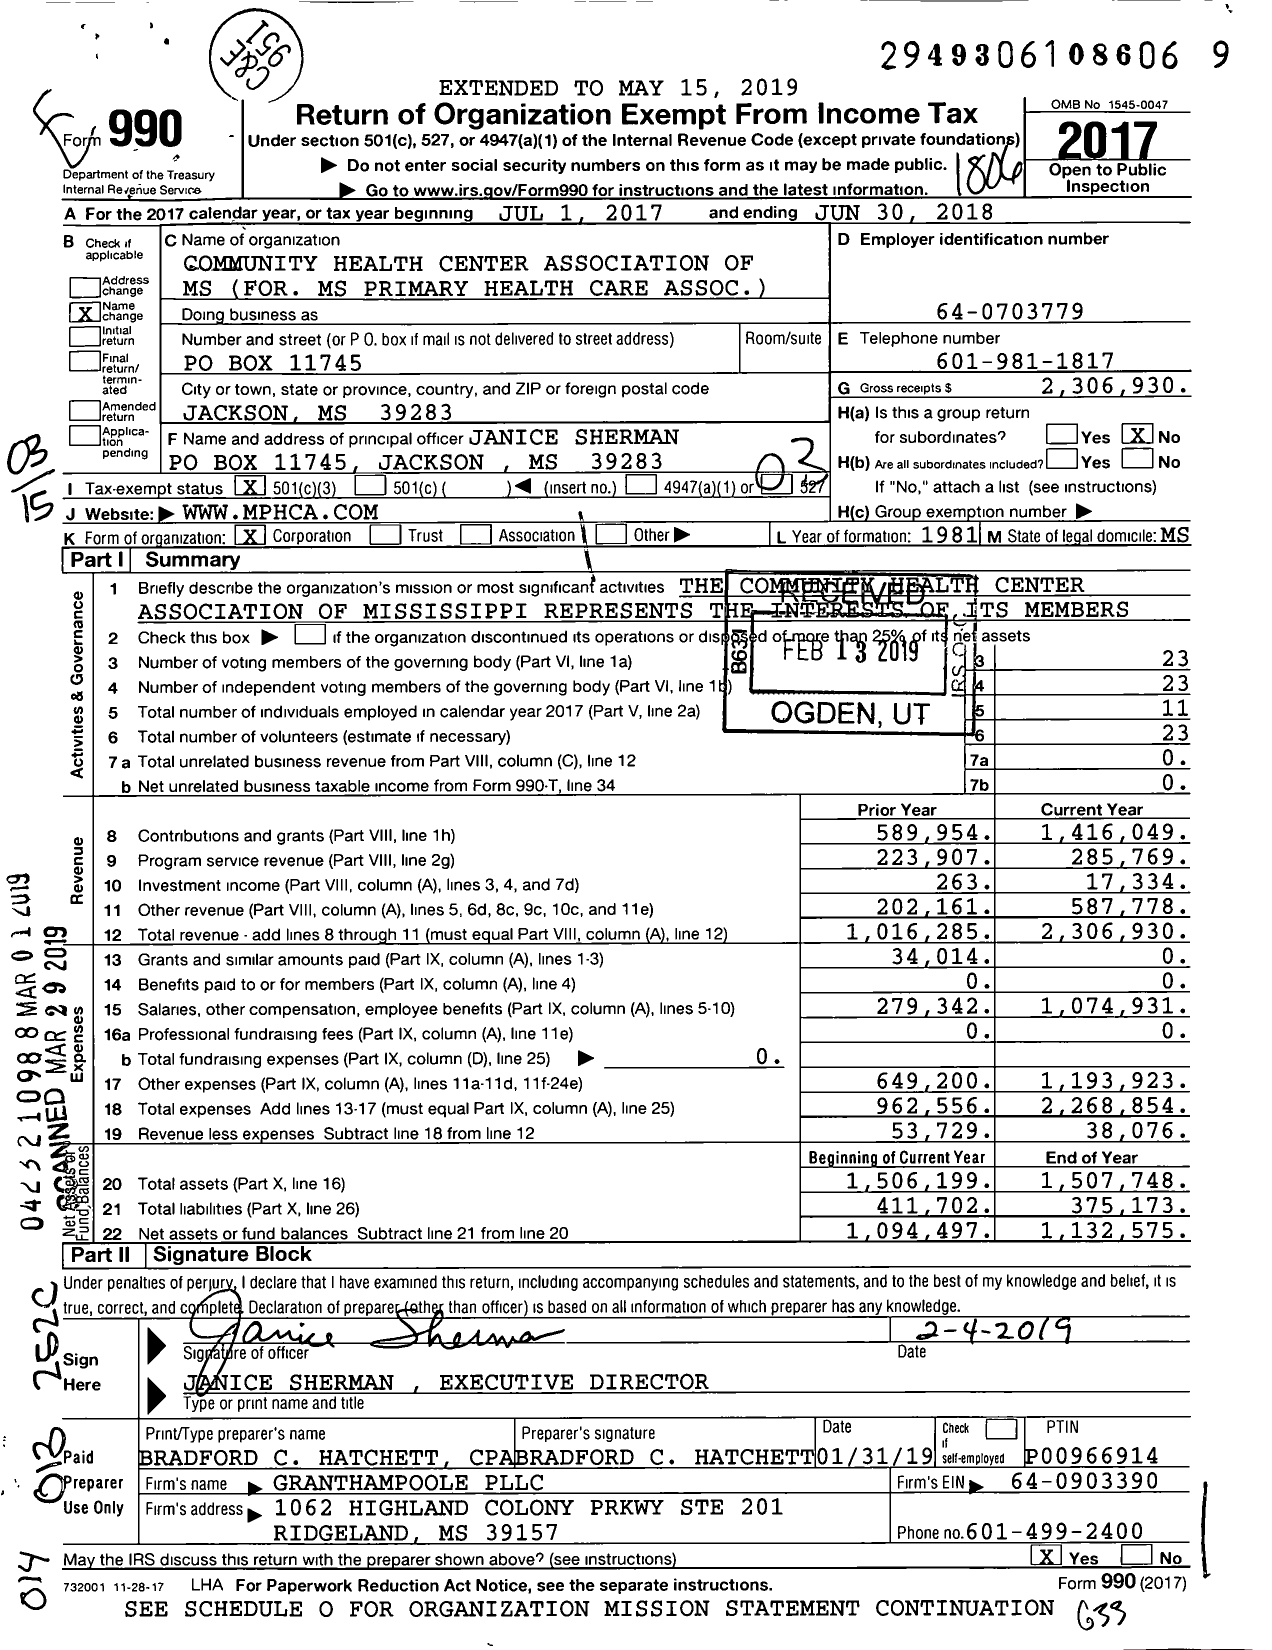 Image of first page of 2017 Form 990 for Community Health Center Association of MS (MPHCA)